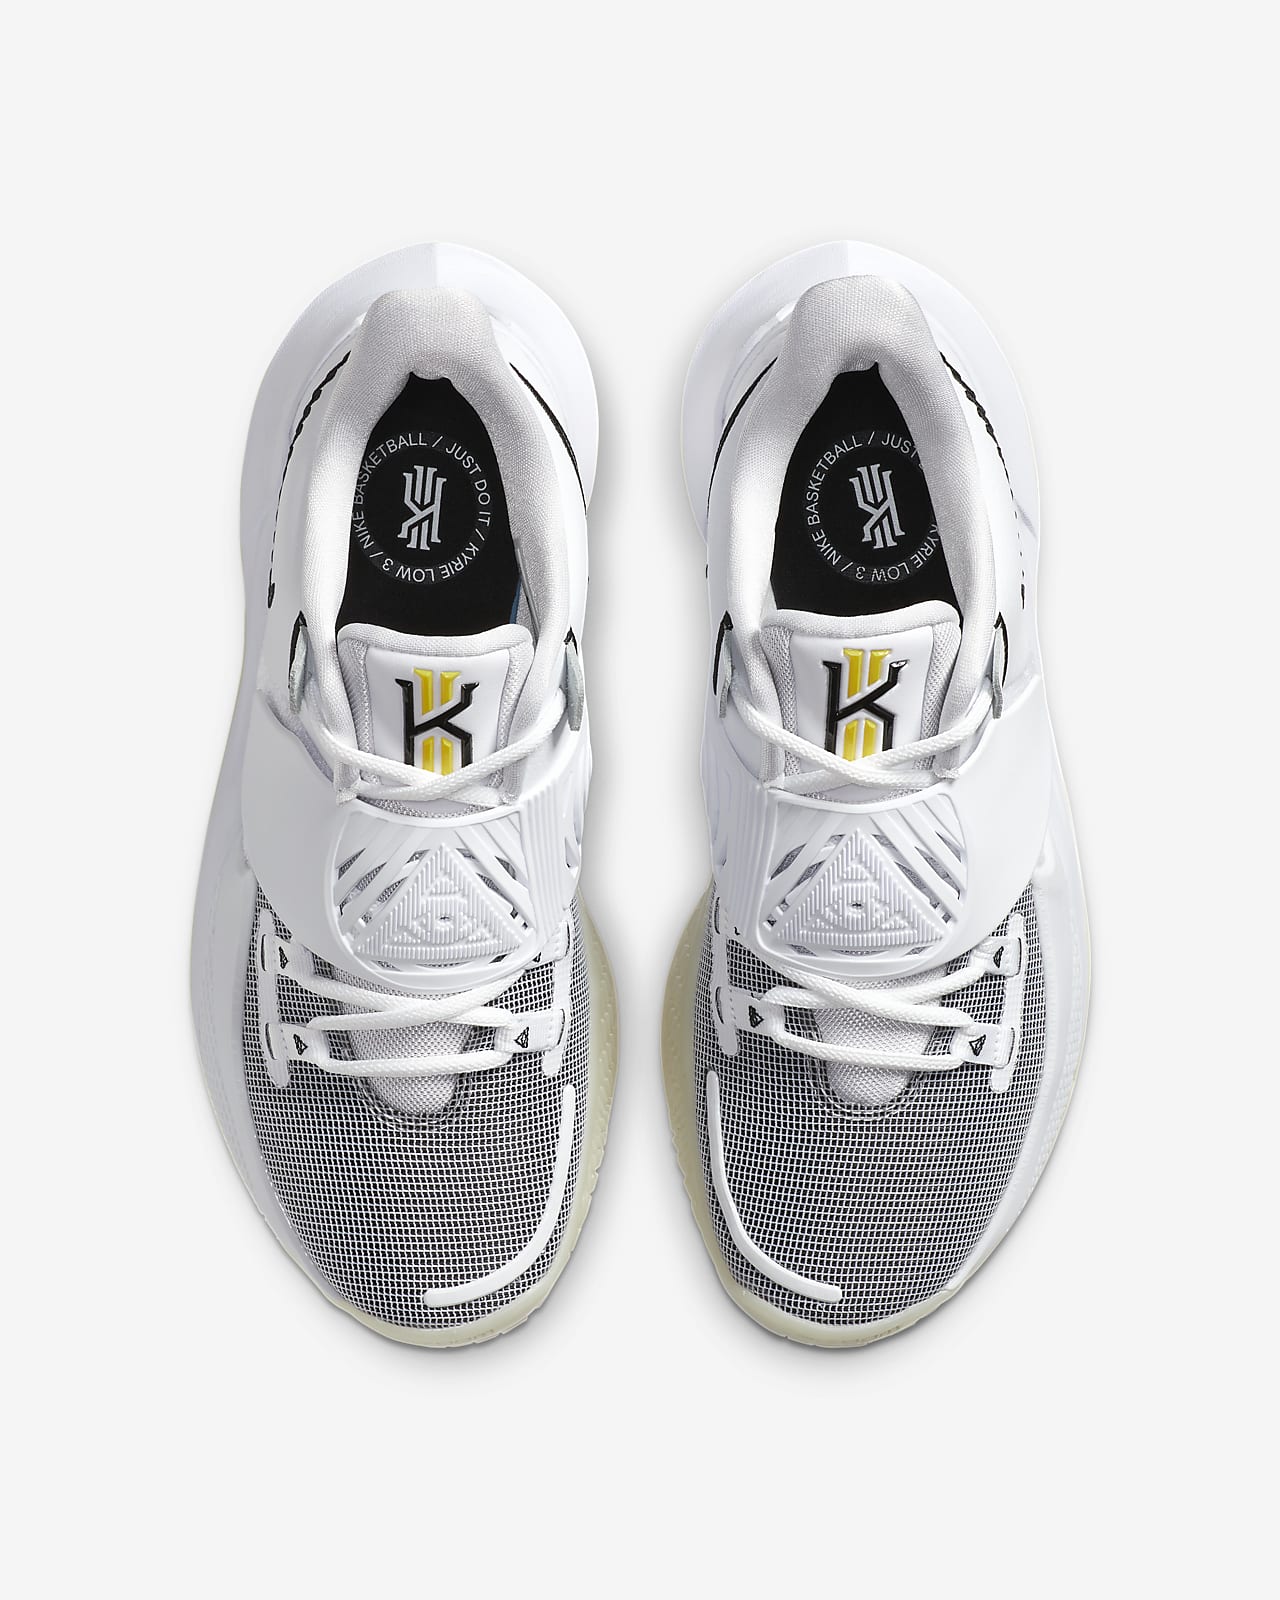 kyrie irving shoes nike zoom